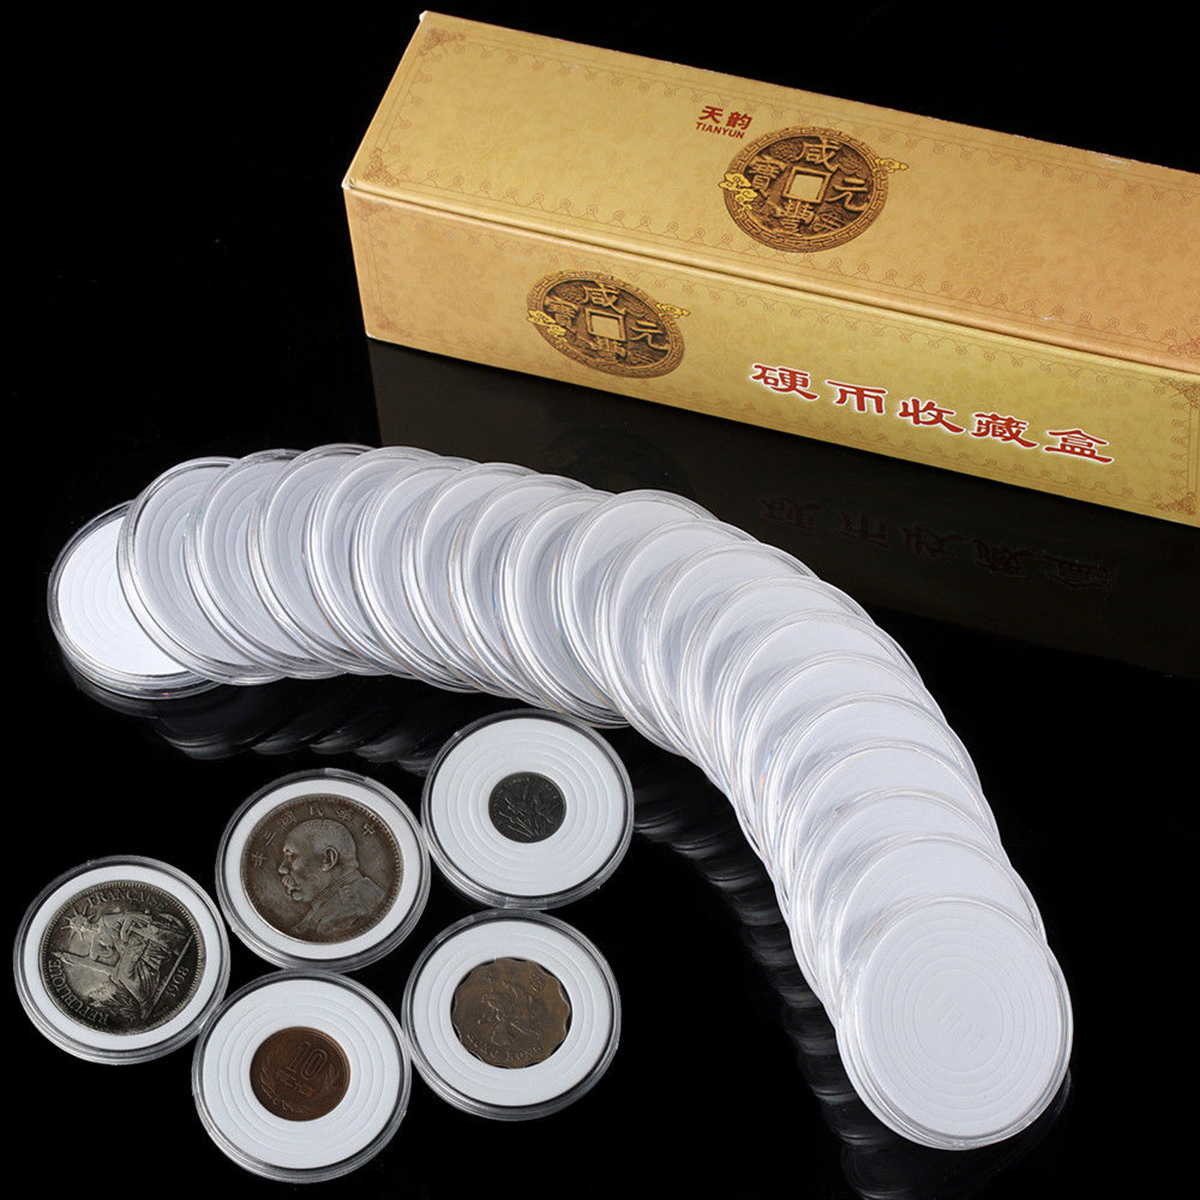 20pcs-Applied-Mint-Coin-Display-Holder-Storage-Boxes-Capsules-Protector-20-40mm-1254233-3